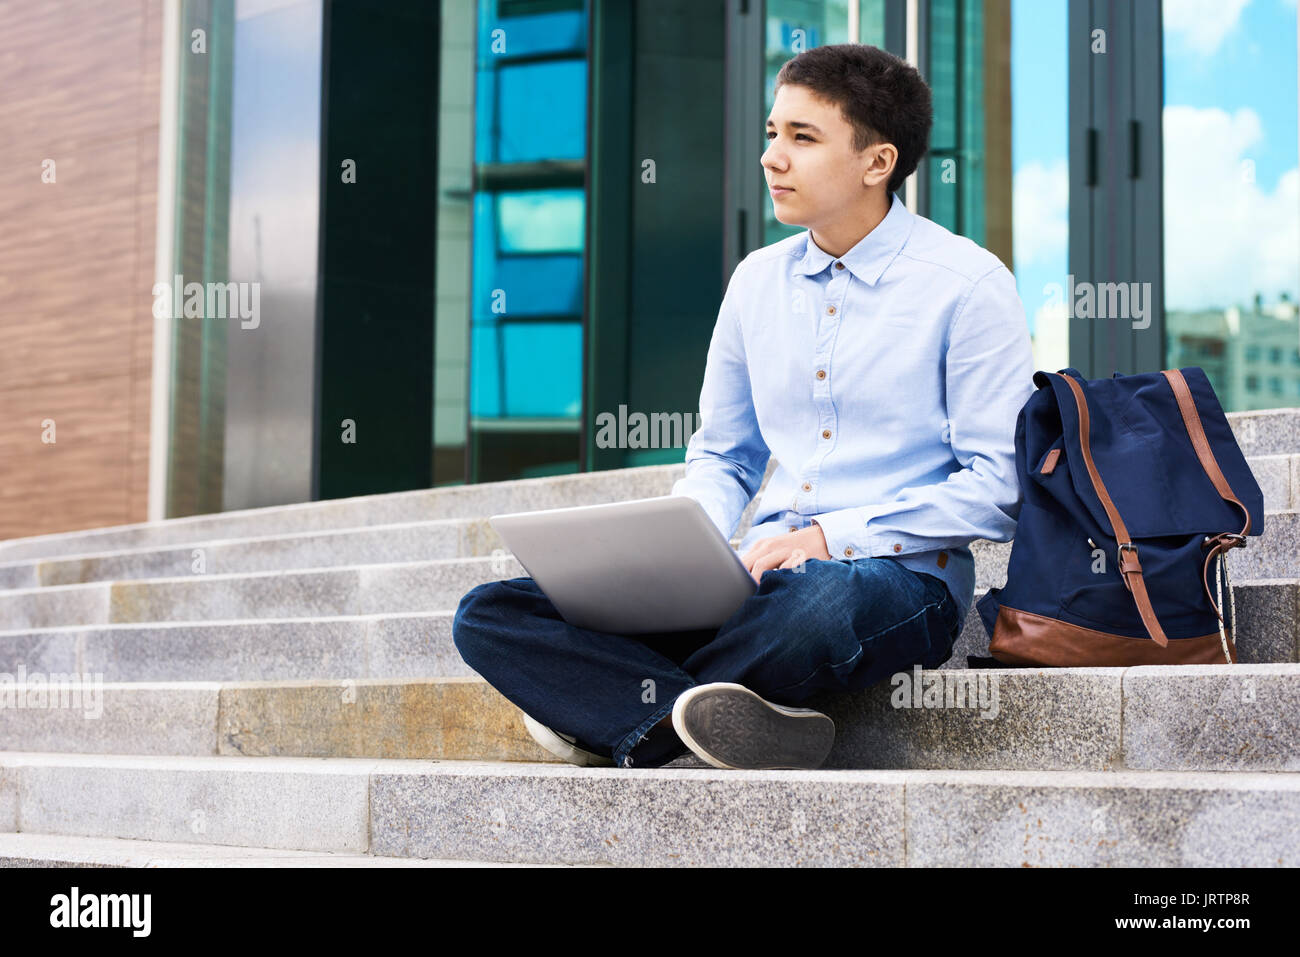 Pensive Schoolboy with Laptop Outdoors Stock Photo